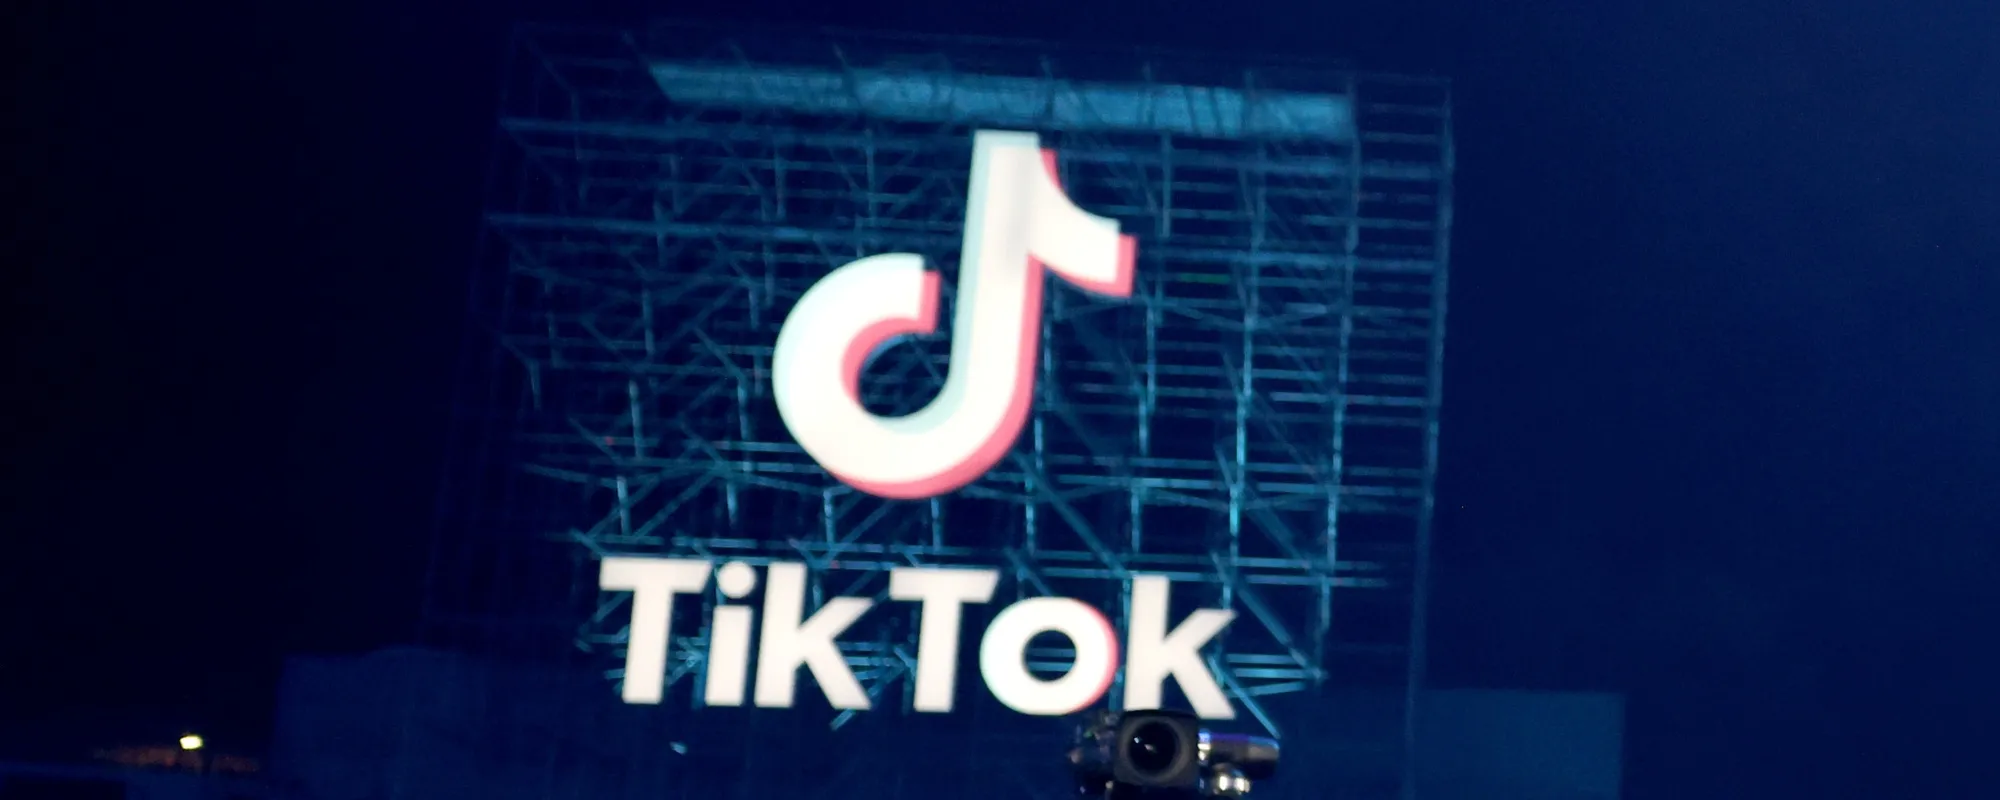 Universal Music Group Will Pull Entire Catalog From TikTok, What That Means for Creators